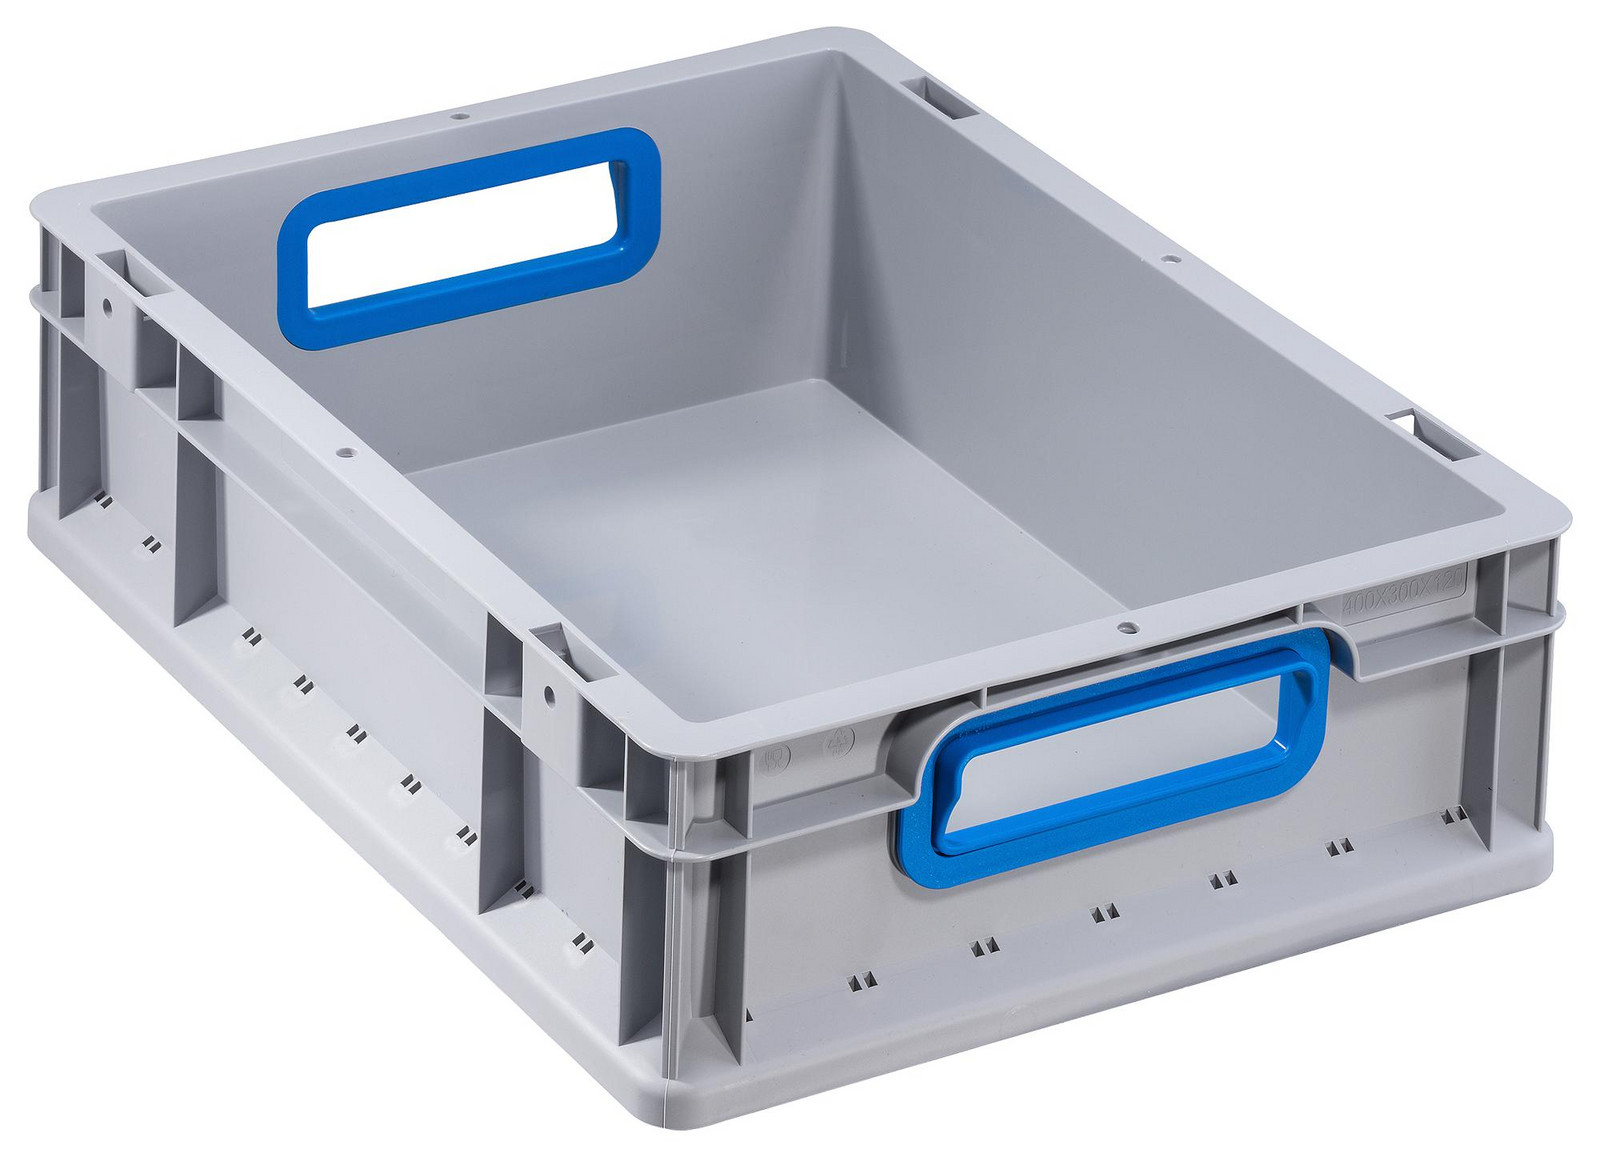 Allit 456720 Euro Container, 400X300X120mm, Blu/gry